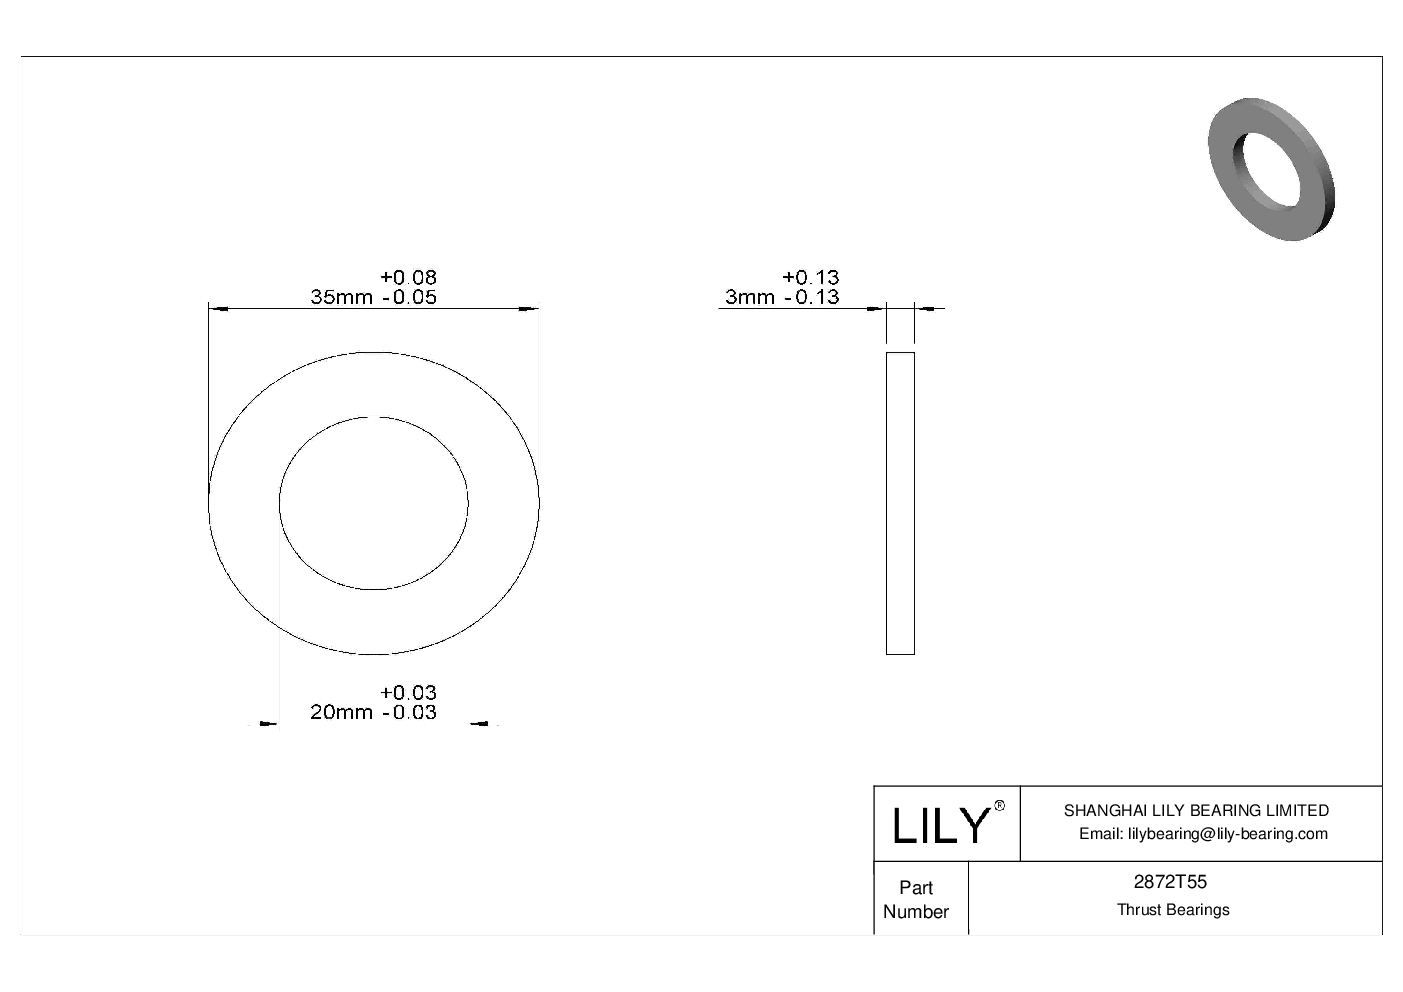 CIHCTFF Corrosion-Resistant Thrust Bearings cad drawing